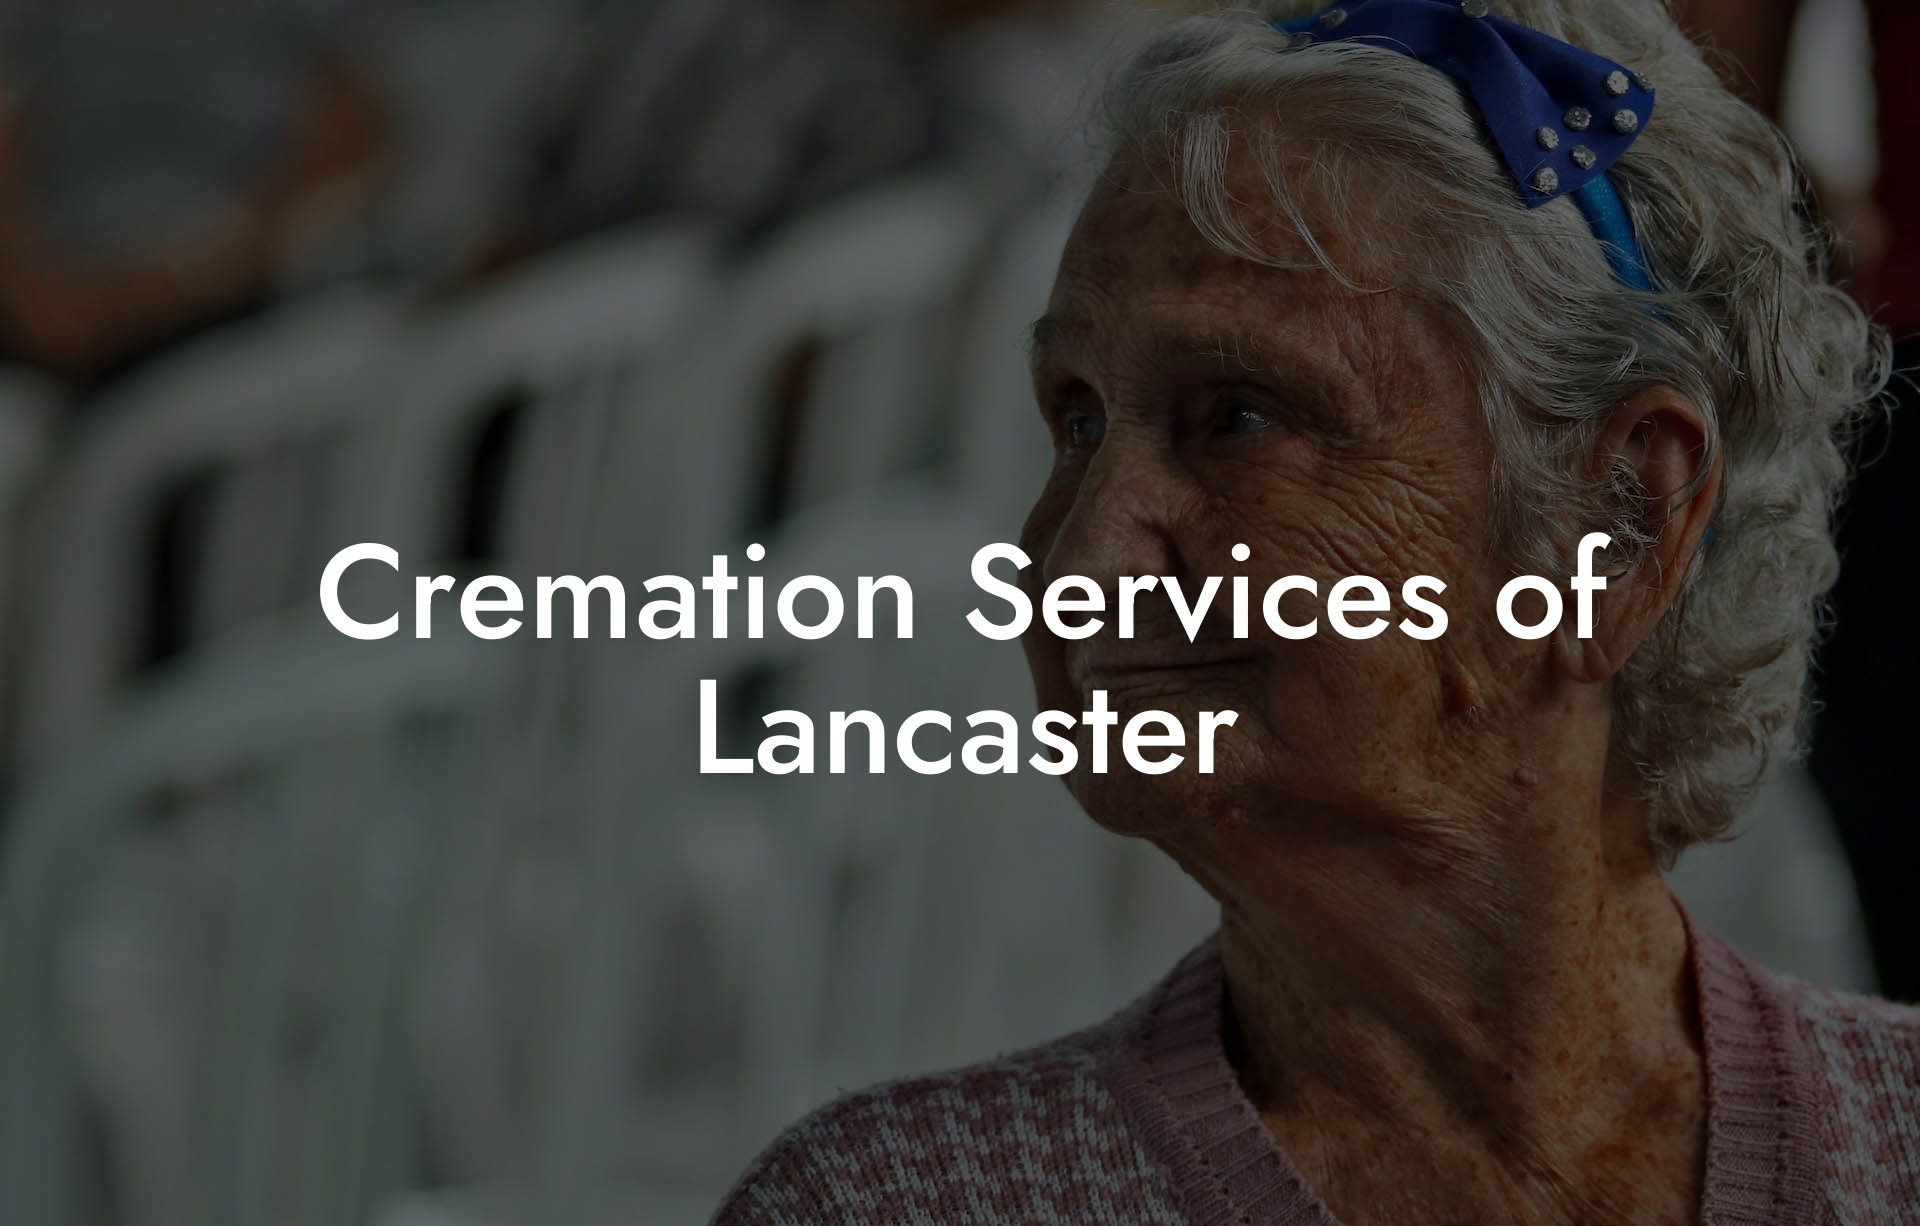 Cremation Services of Lancaster